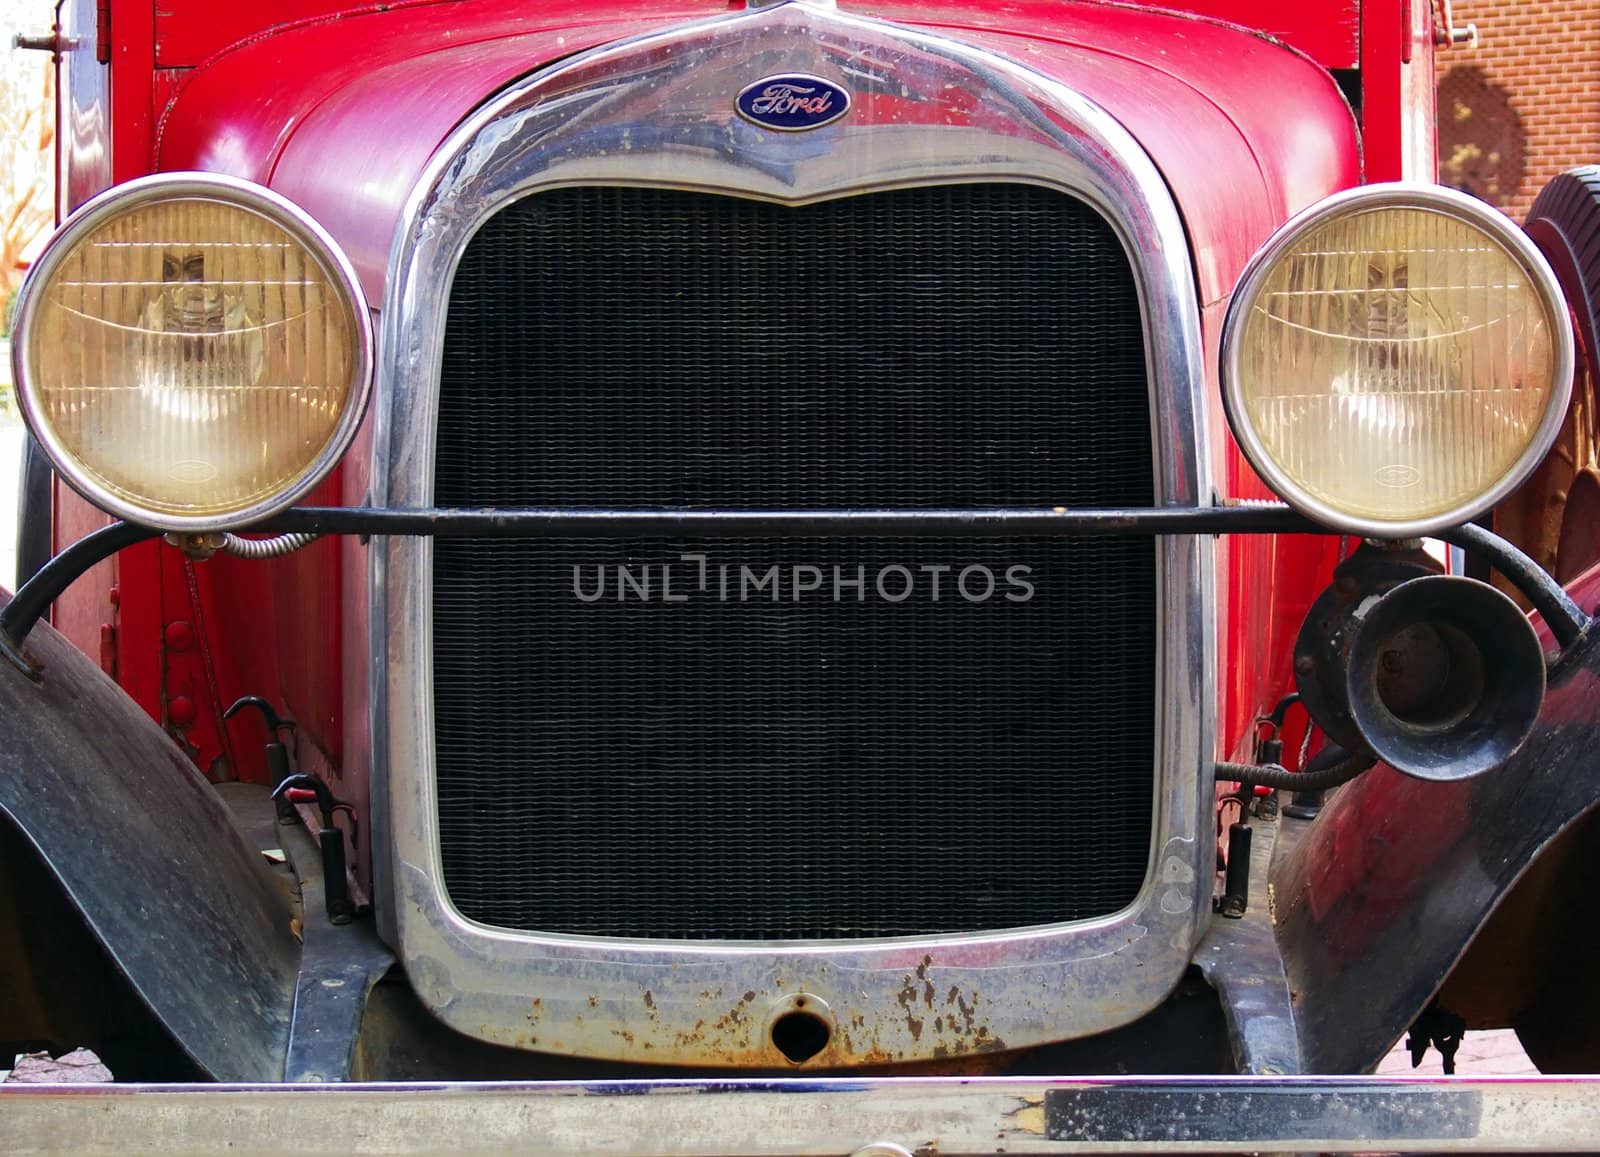 The front of a old automobile